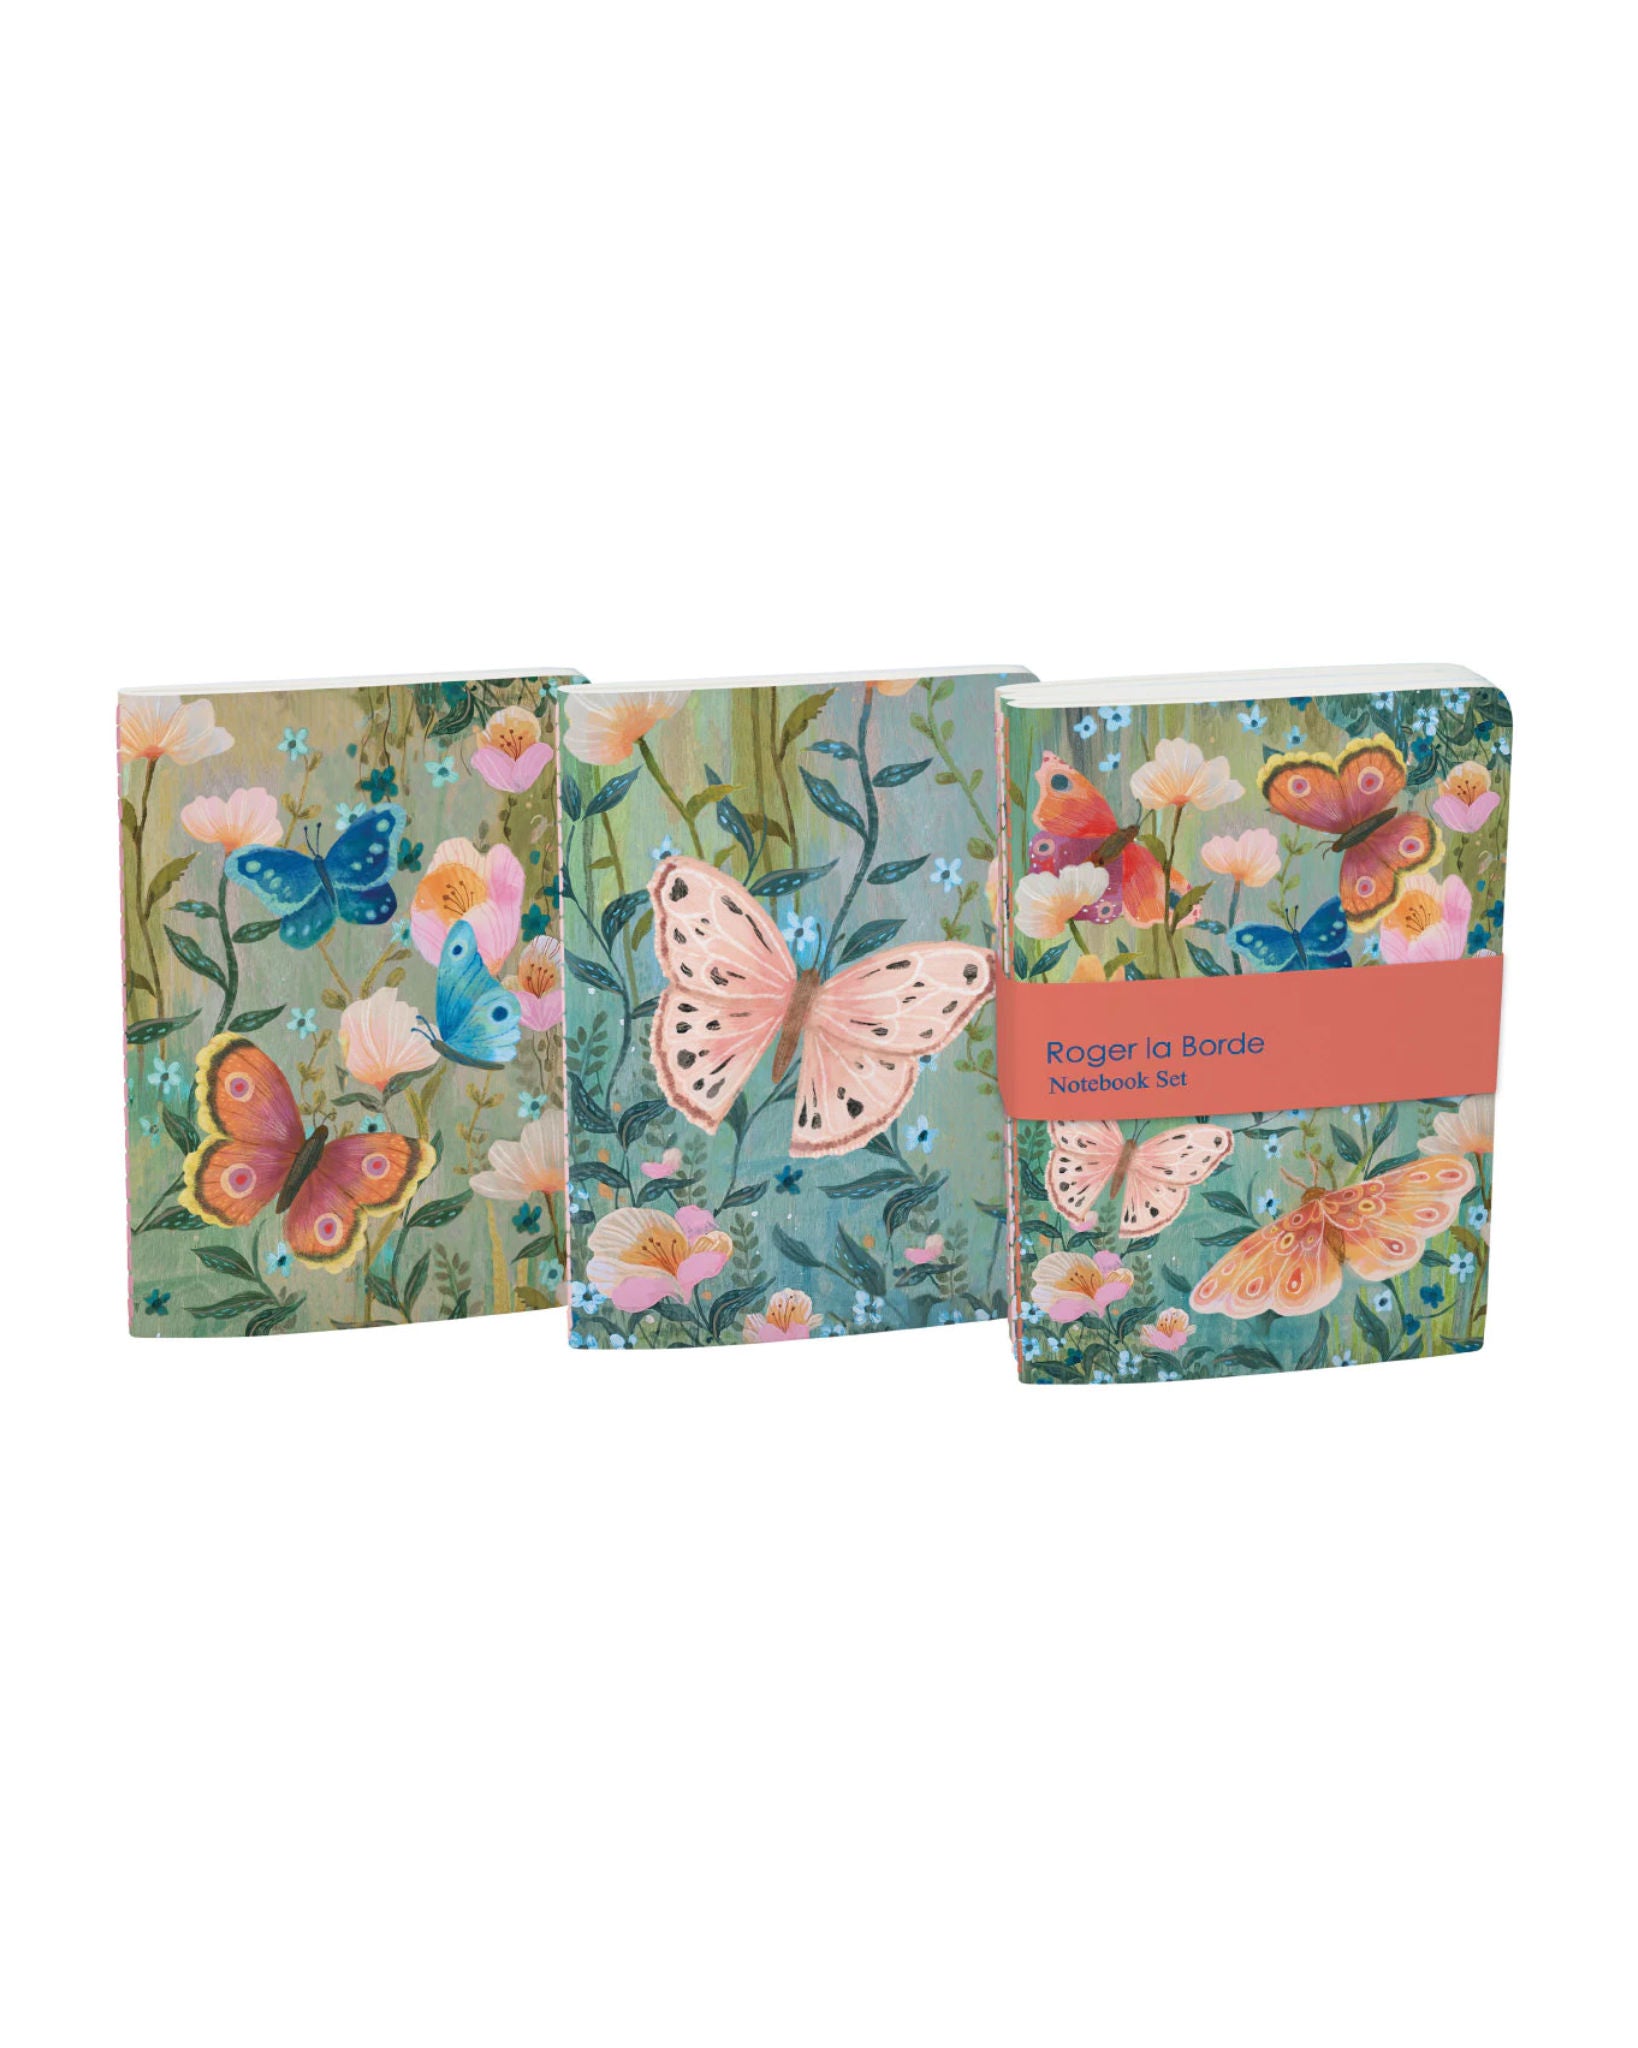 Butterfly Ball A6 Exercise Books Set